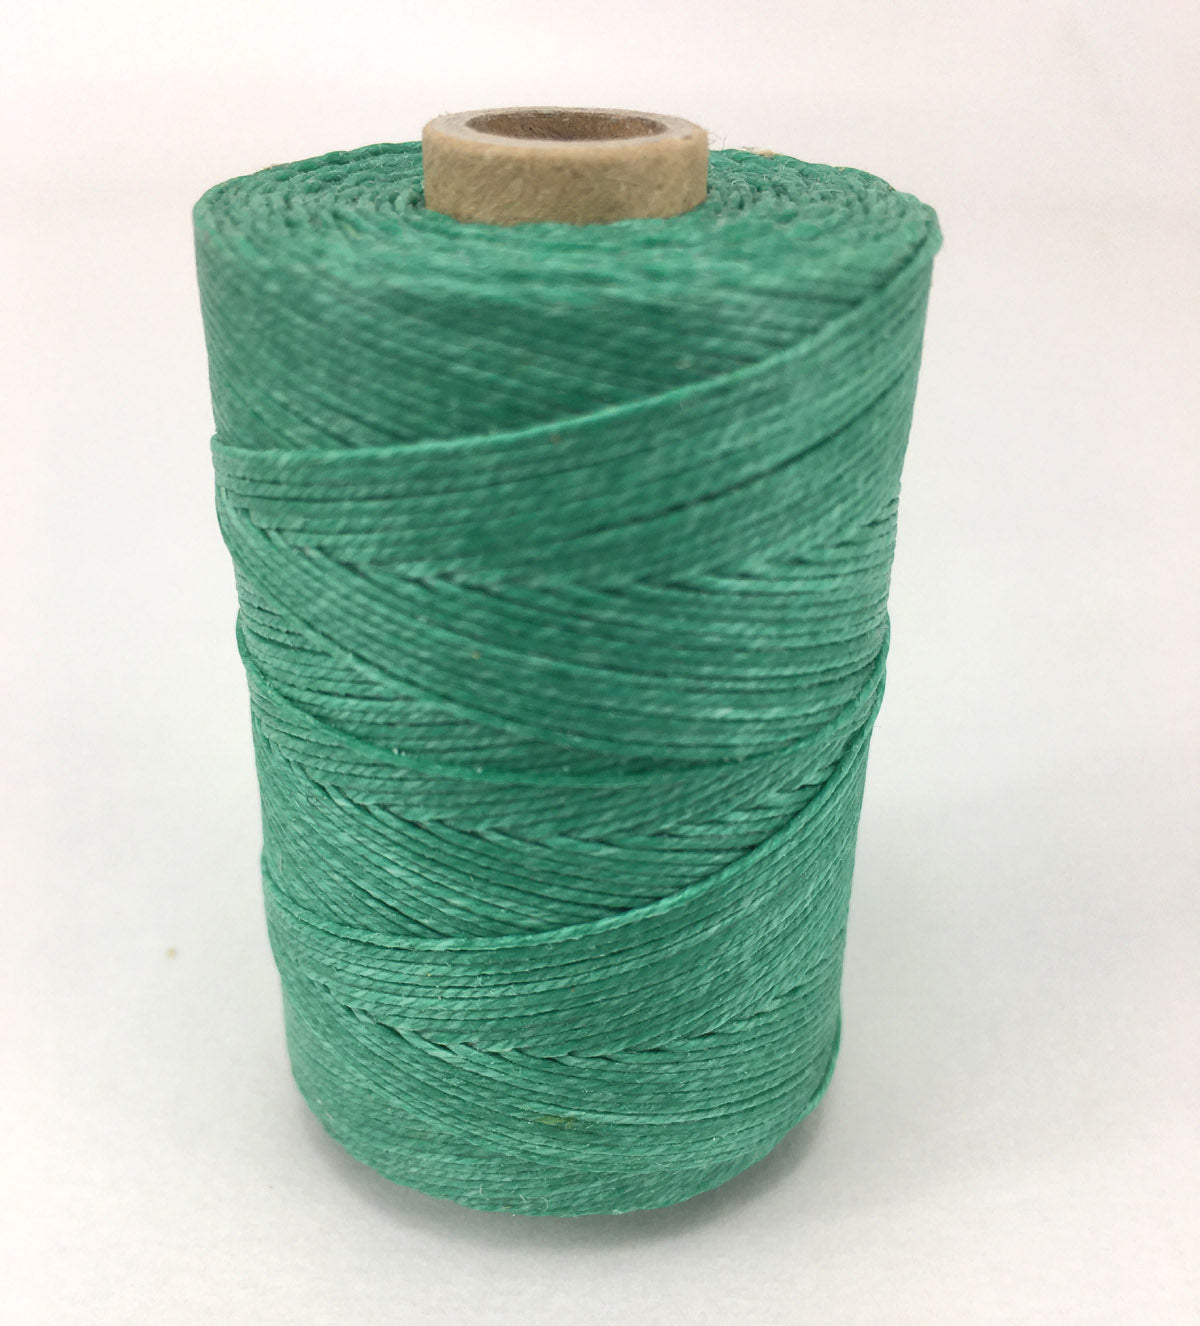 Turquoise- Per spool 50g- 100% Pure Linen Thread- Waxed- 18/3 No.18 Cord 3- Approx 0.55mm thick